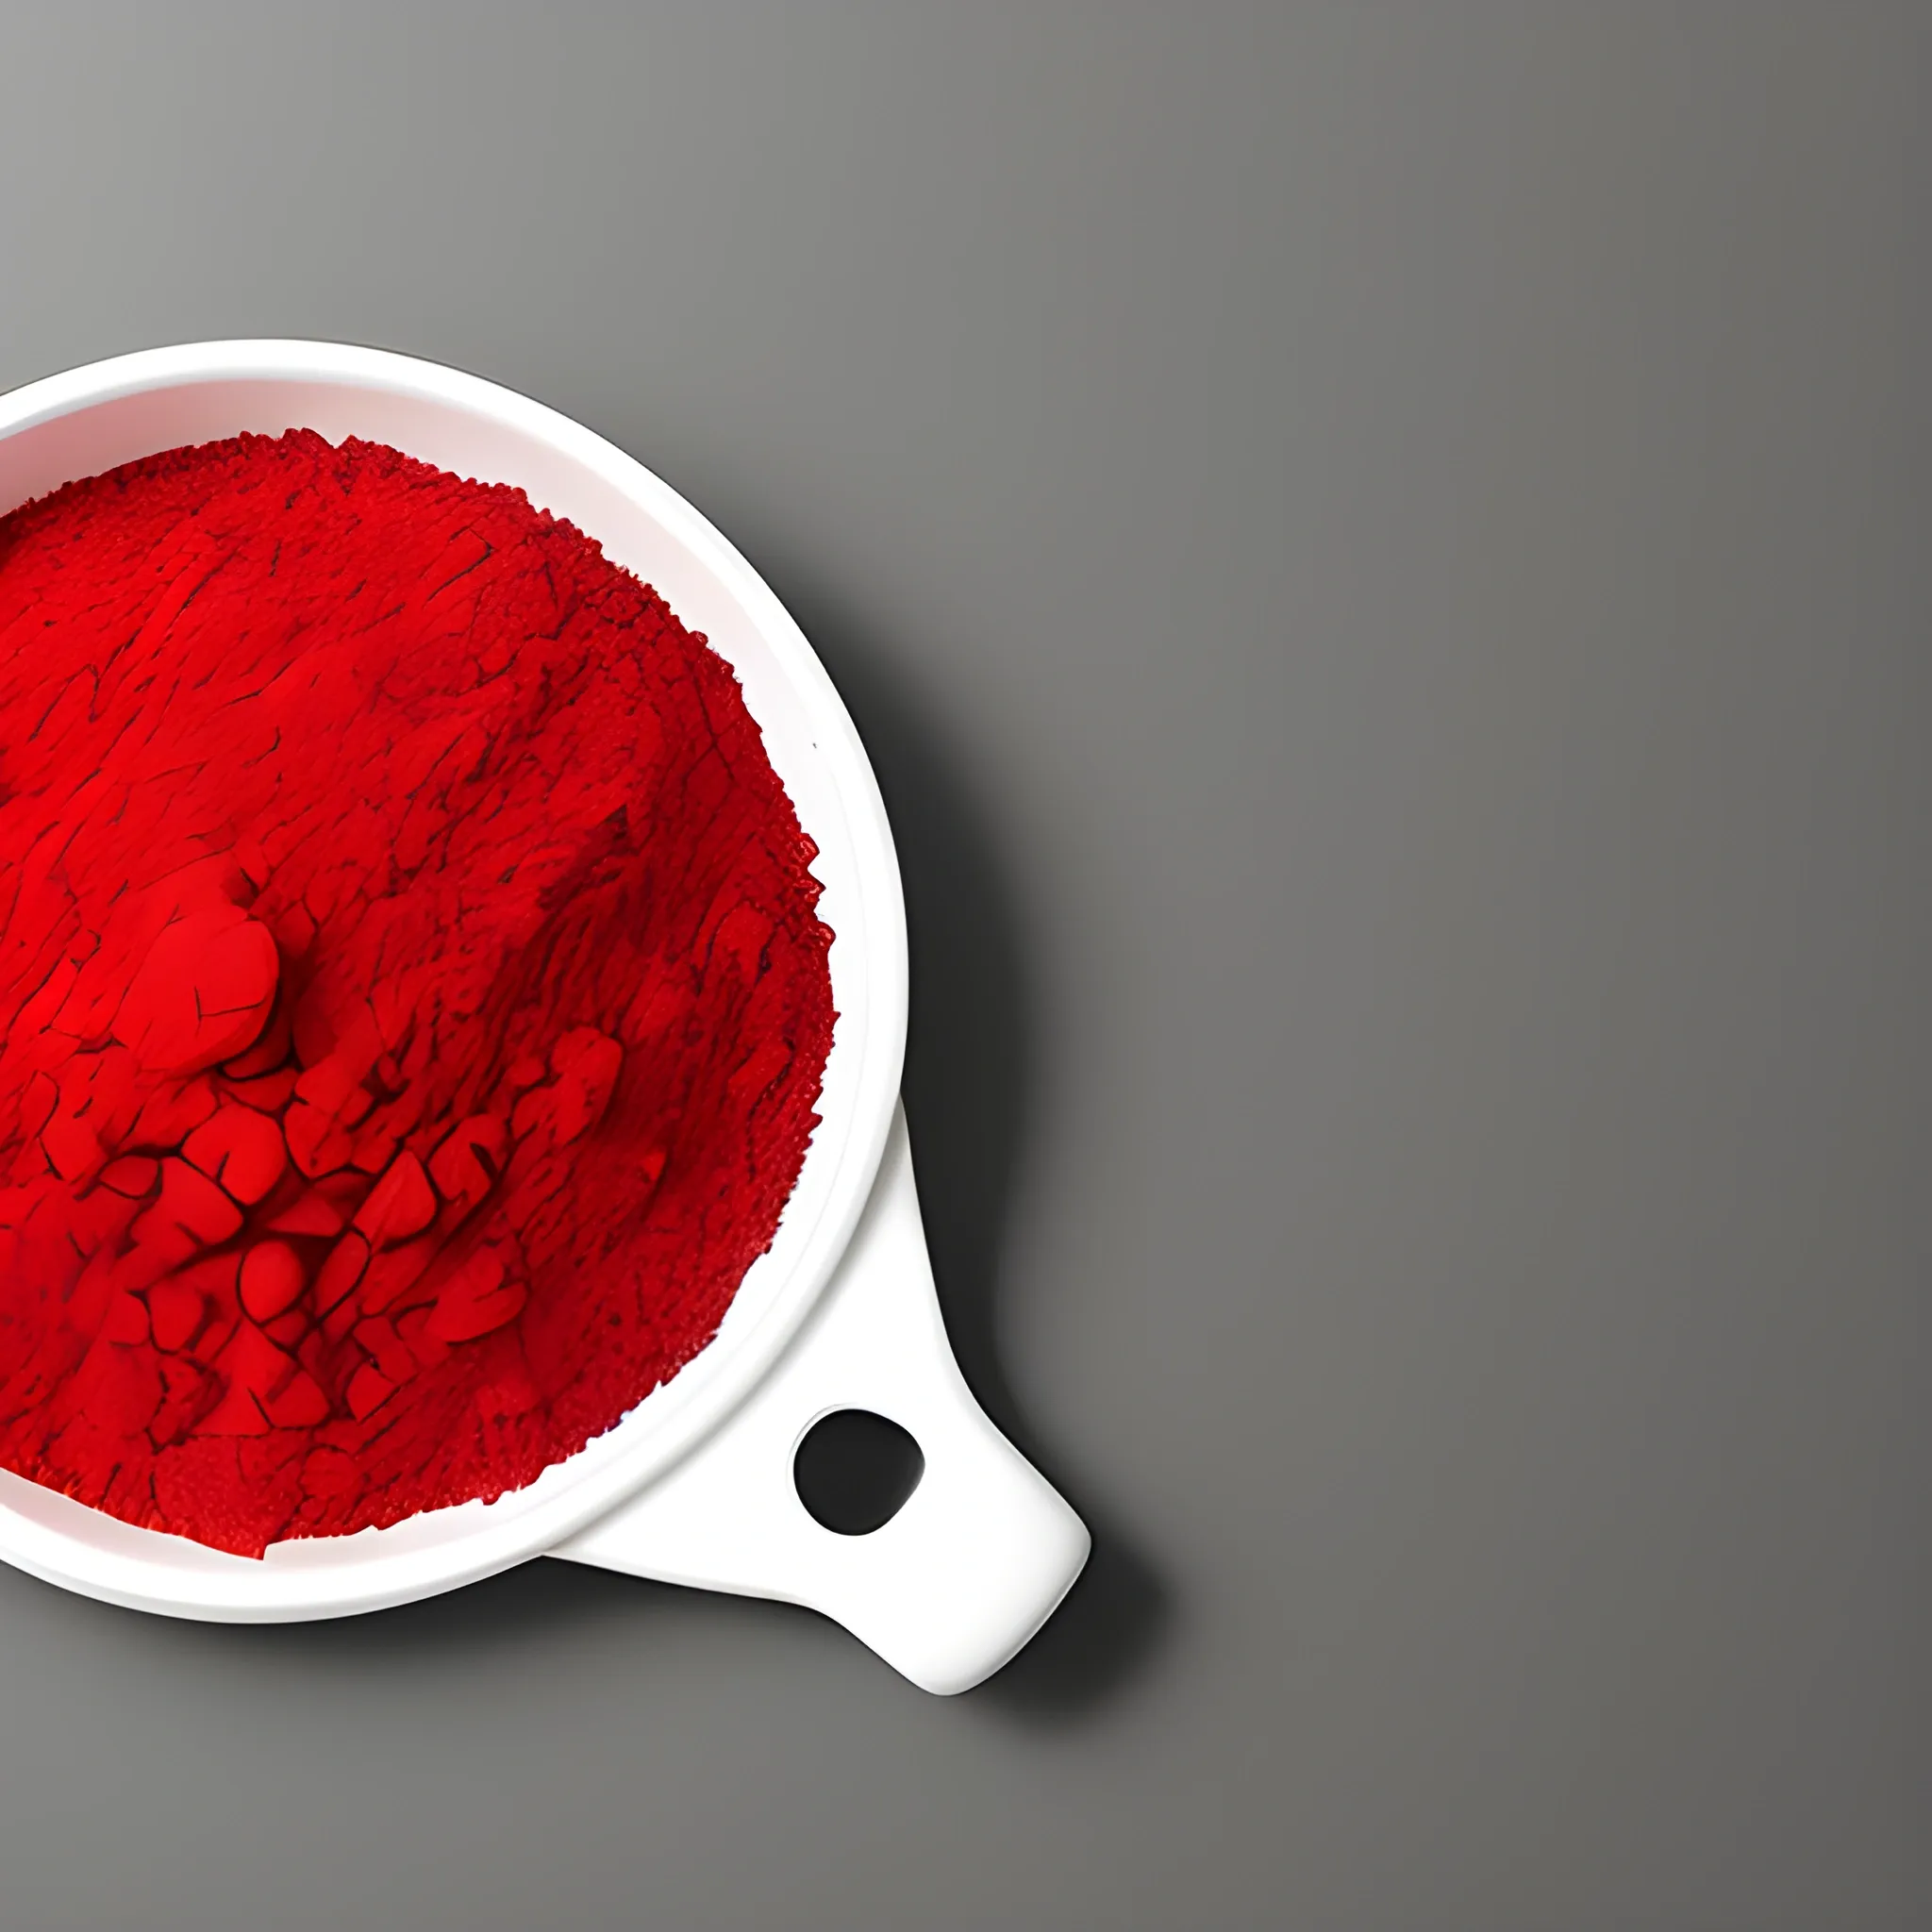 red, health mixture
